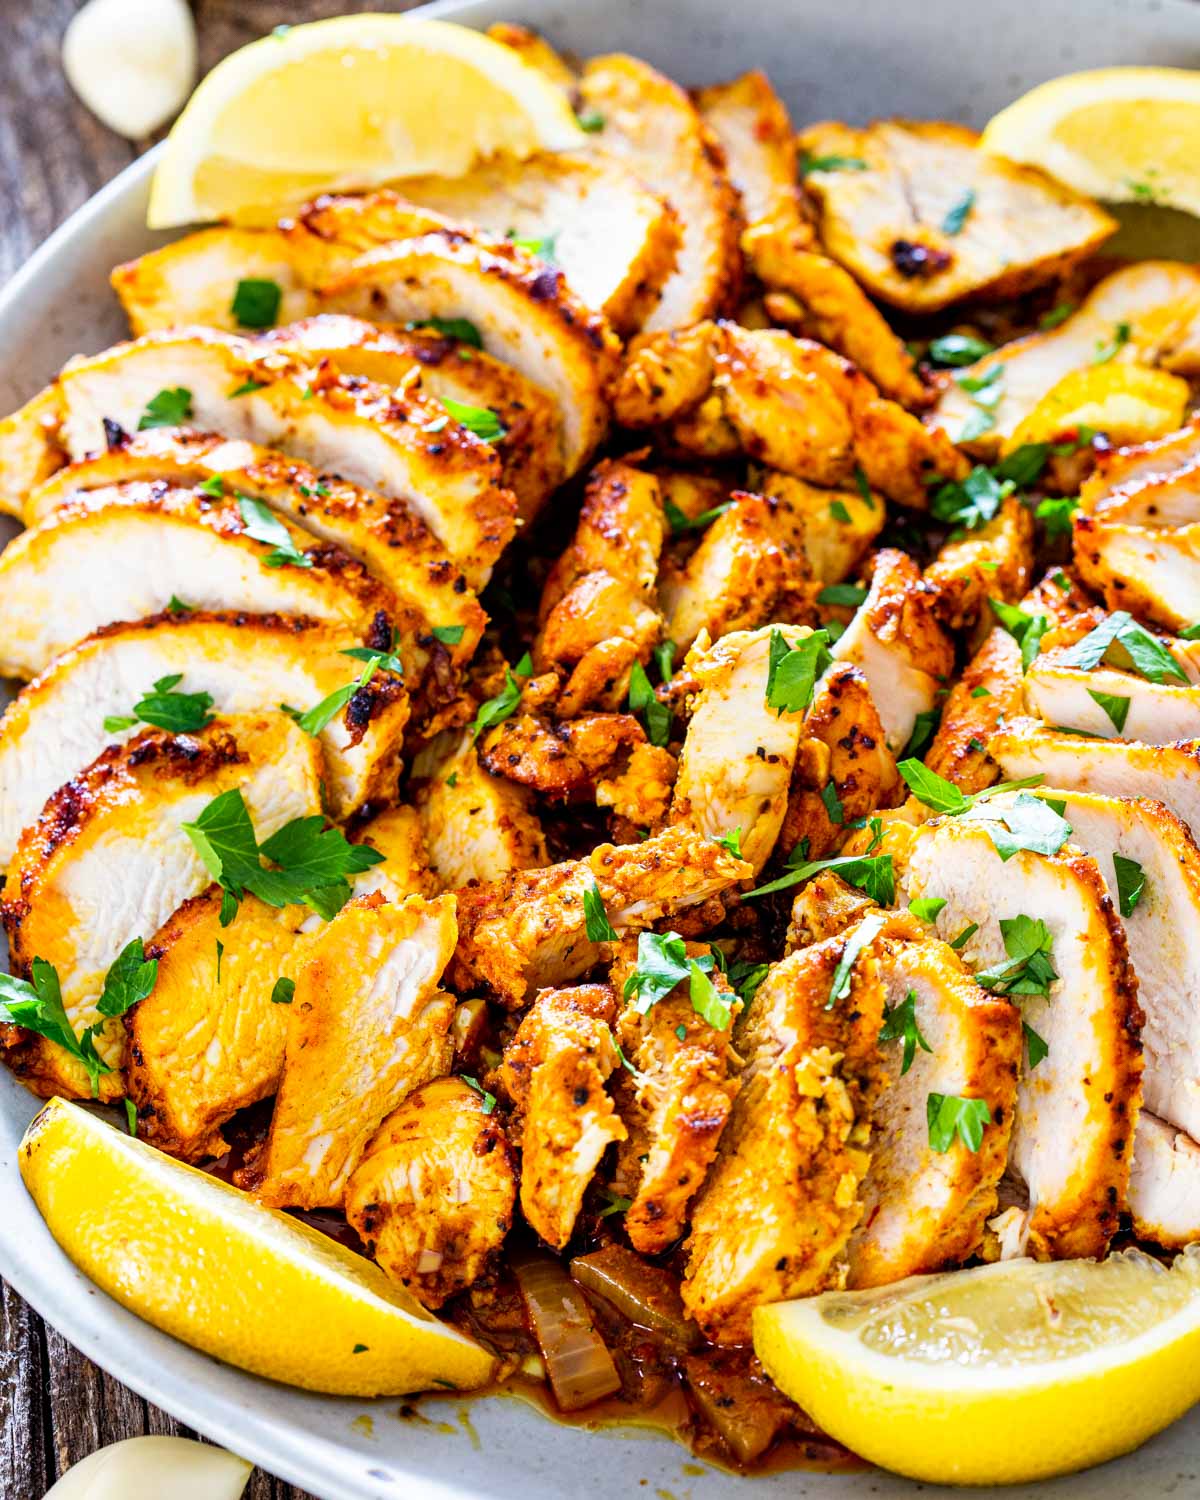 chicken shawarma sliced on a plate garnished with lemon wedges.